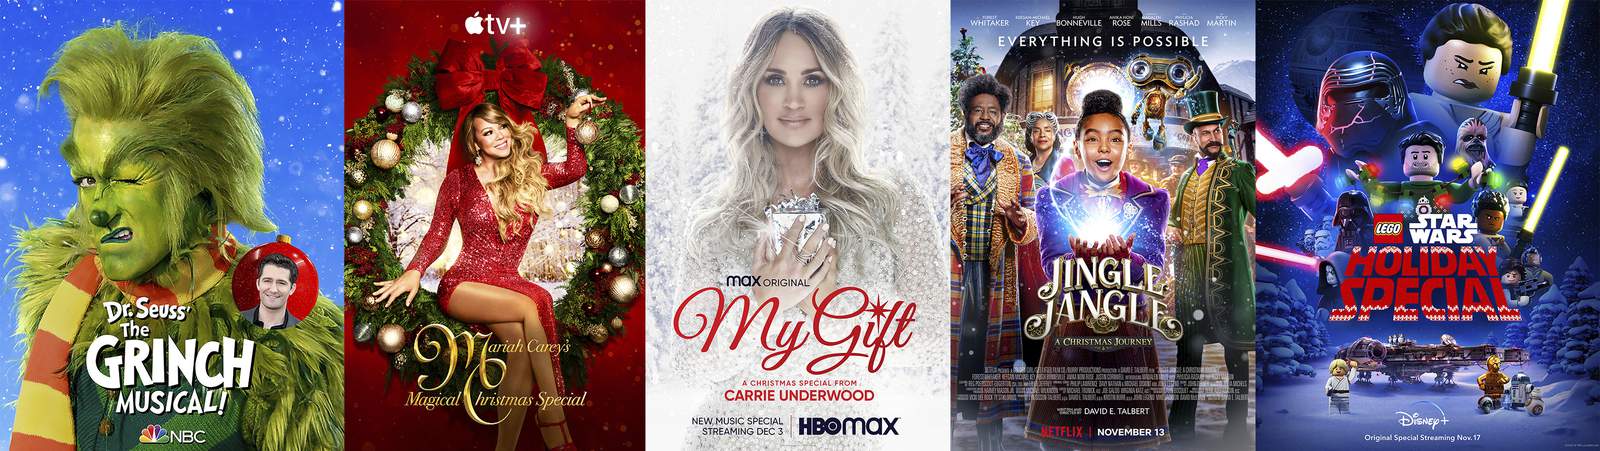 Holiday movies, music specials arrive to light a bleak year